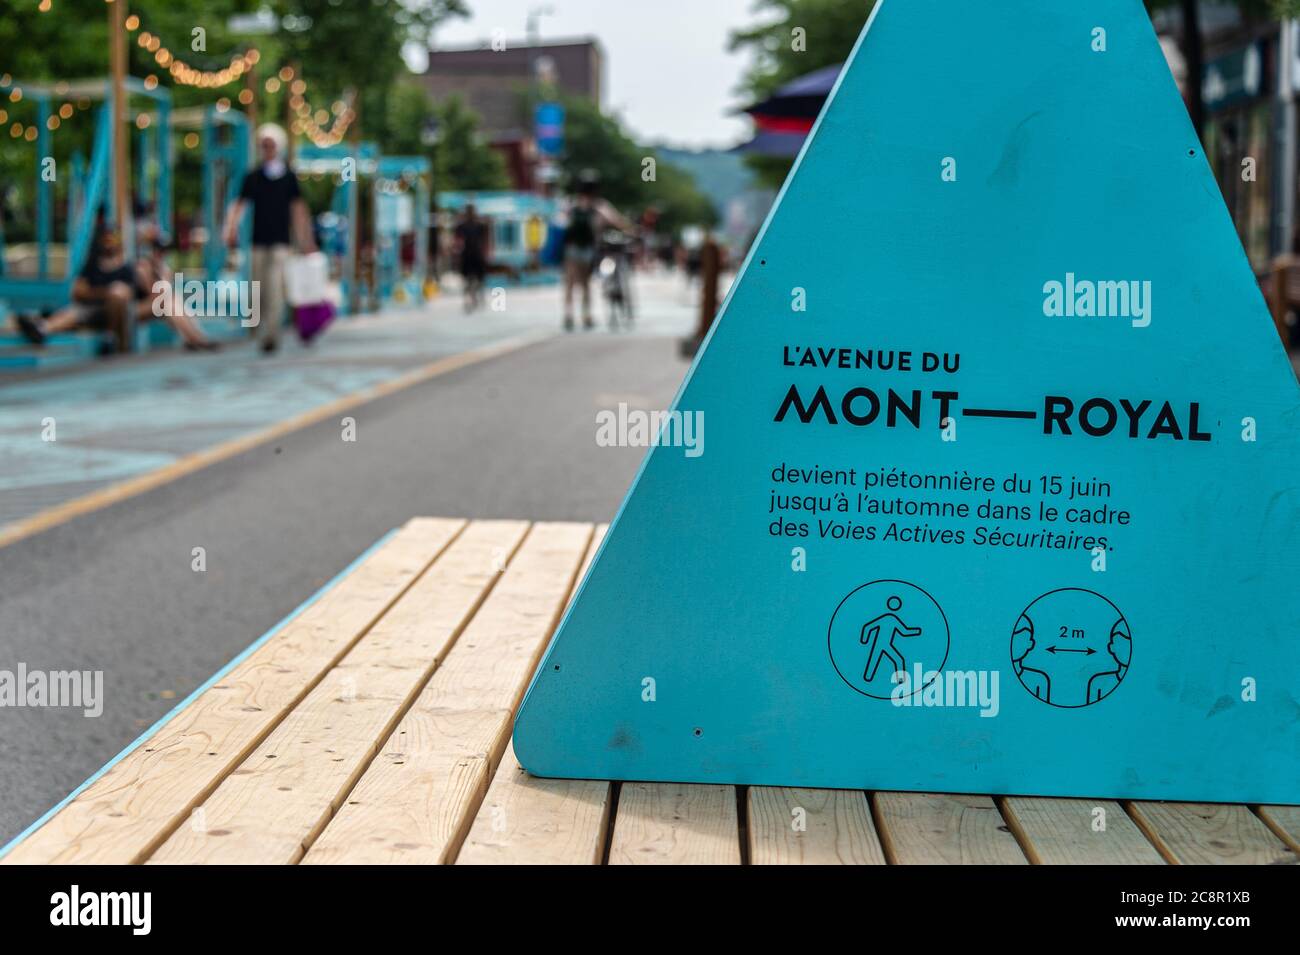 Montreal, CA - 26 July 2020: Voies actives securitaires (safe active transportation circuit) on Mont Royal Avenue during Covid-19 pandemic Stock Photo